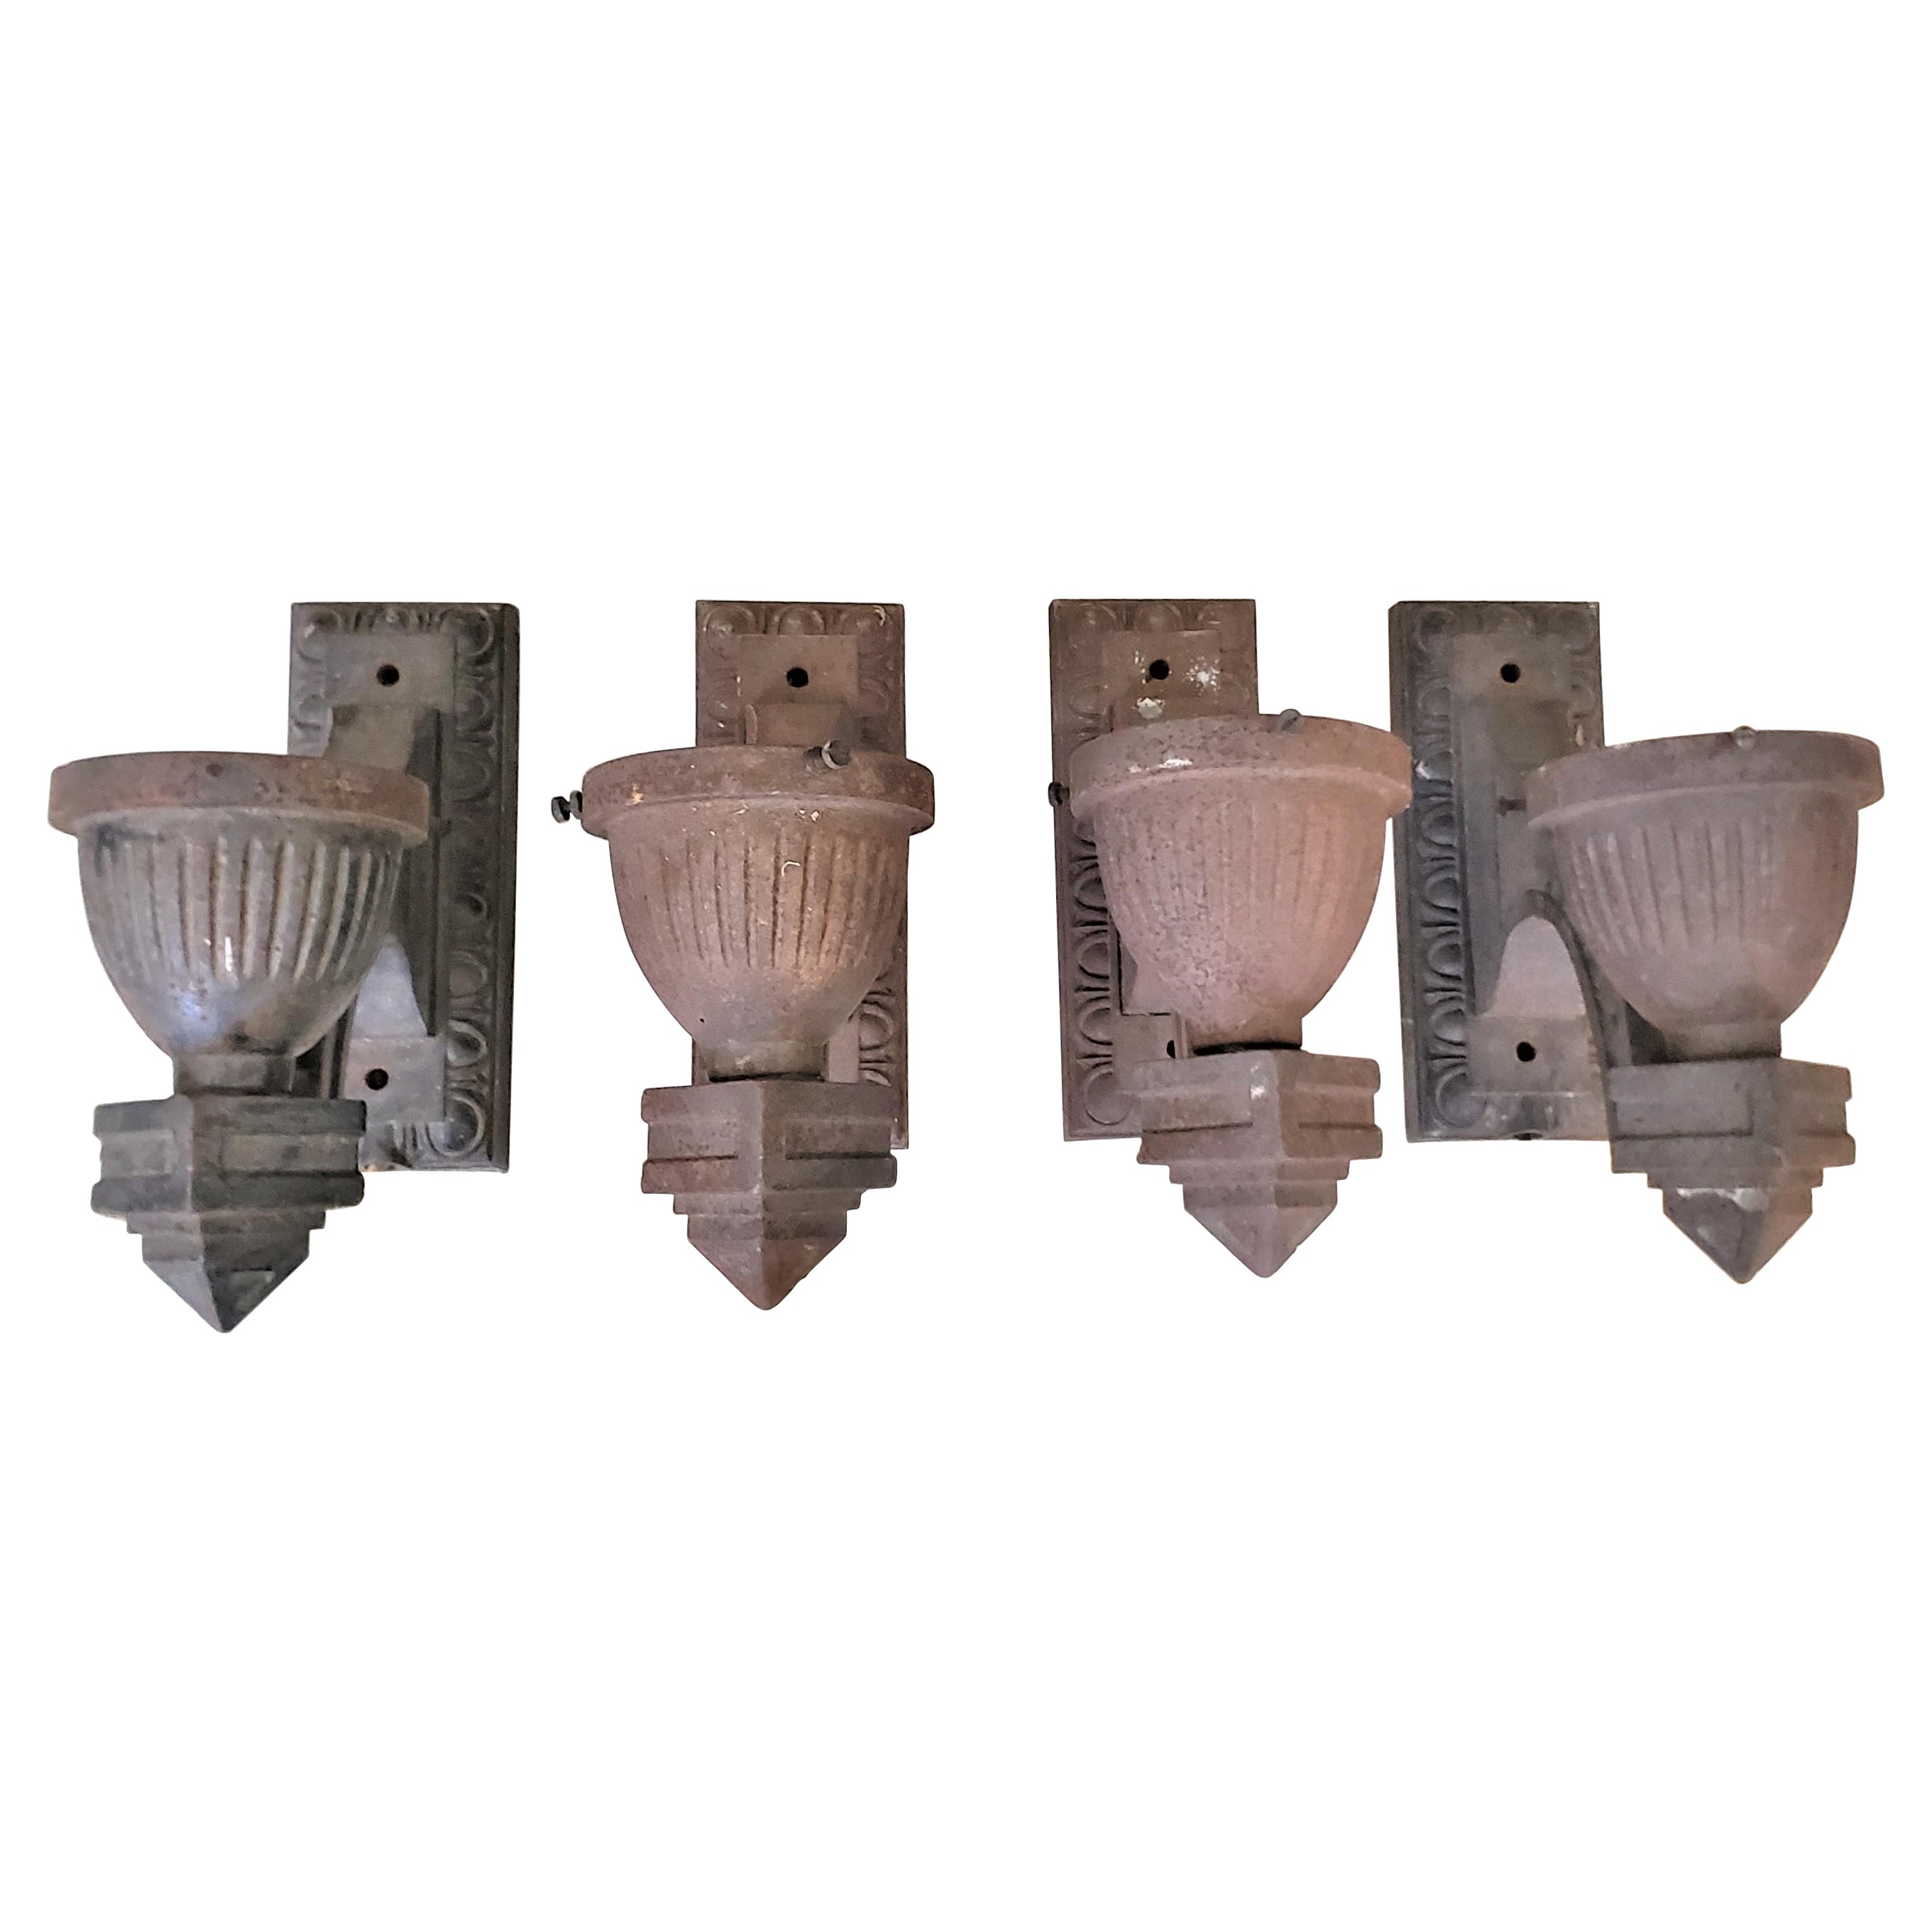 Set of 4 Salvaged Art Deco Heavy Cast Iron Architectural Outdoor Wall Sconces